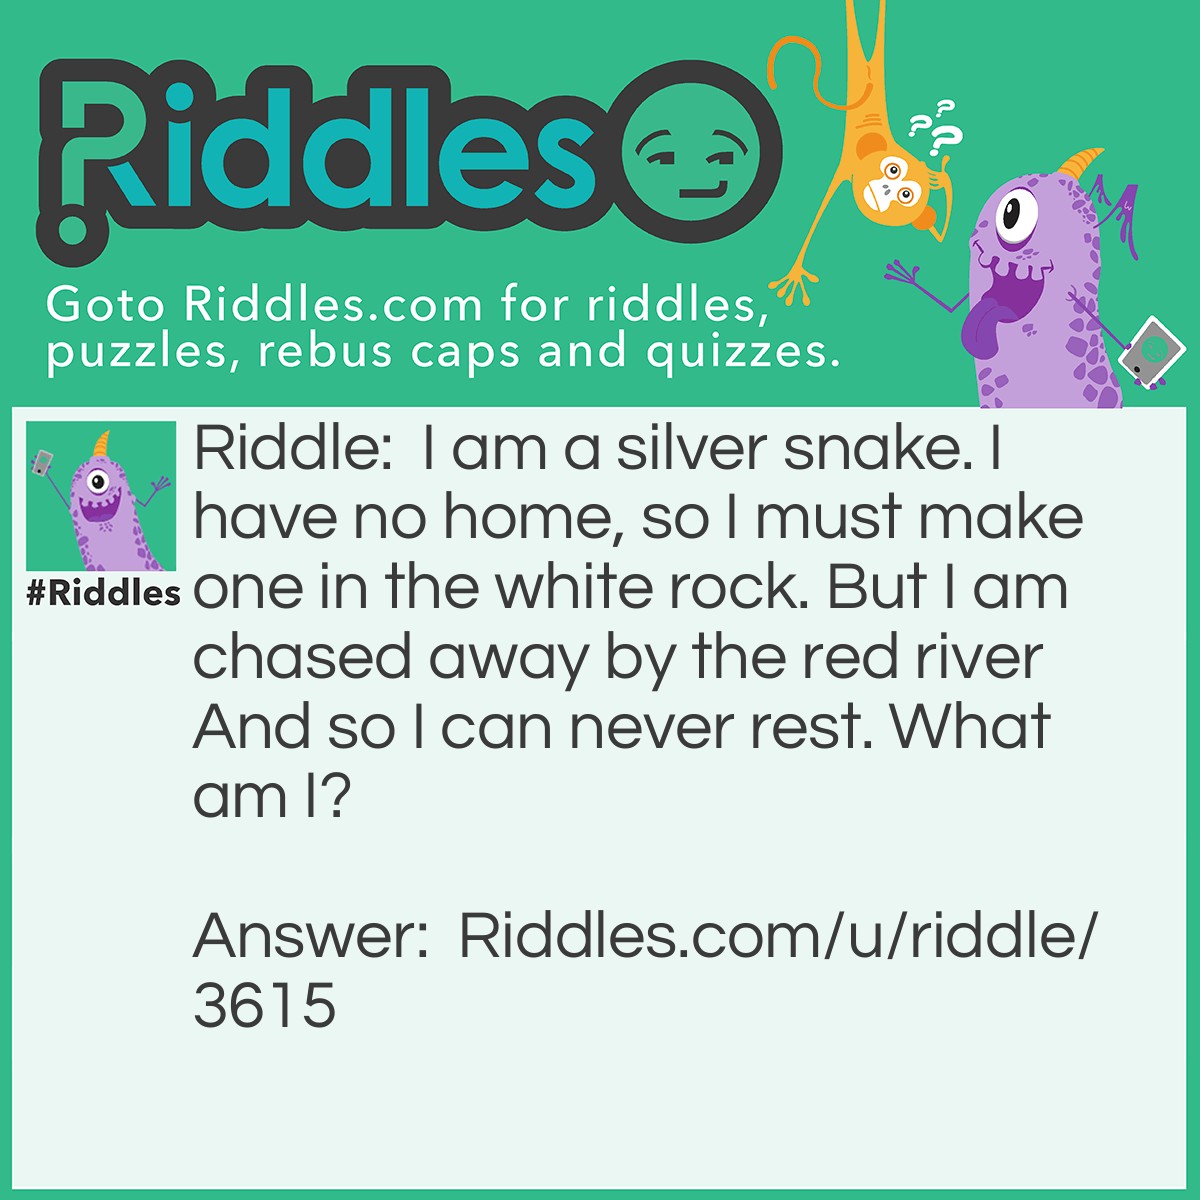 Riddle: I am a silver snake. I have no home, so I must make one in the white rock. But I am chased away by the red river And so I can never rest. What am I? Answer: Sword making a wound. The white rock is the bones. The red river is the blood.